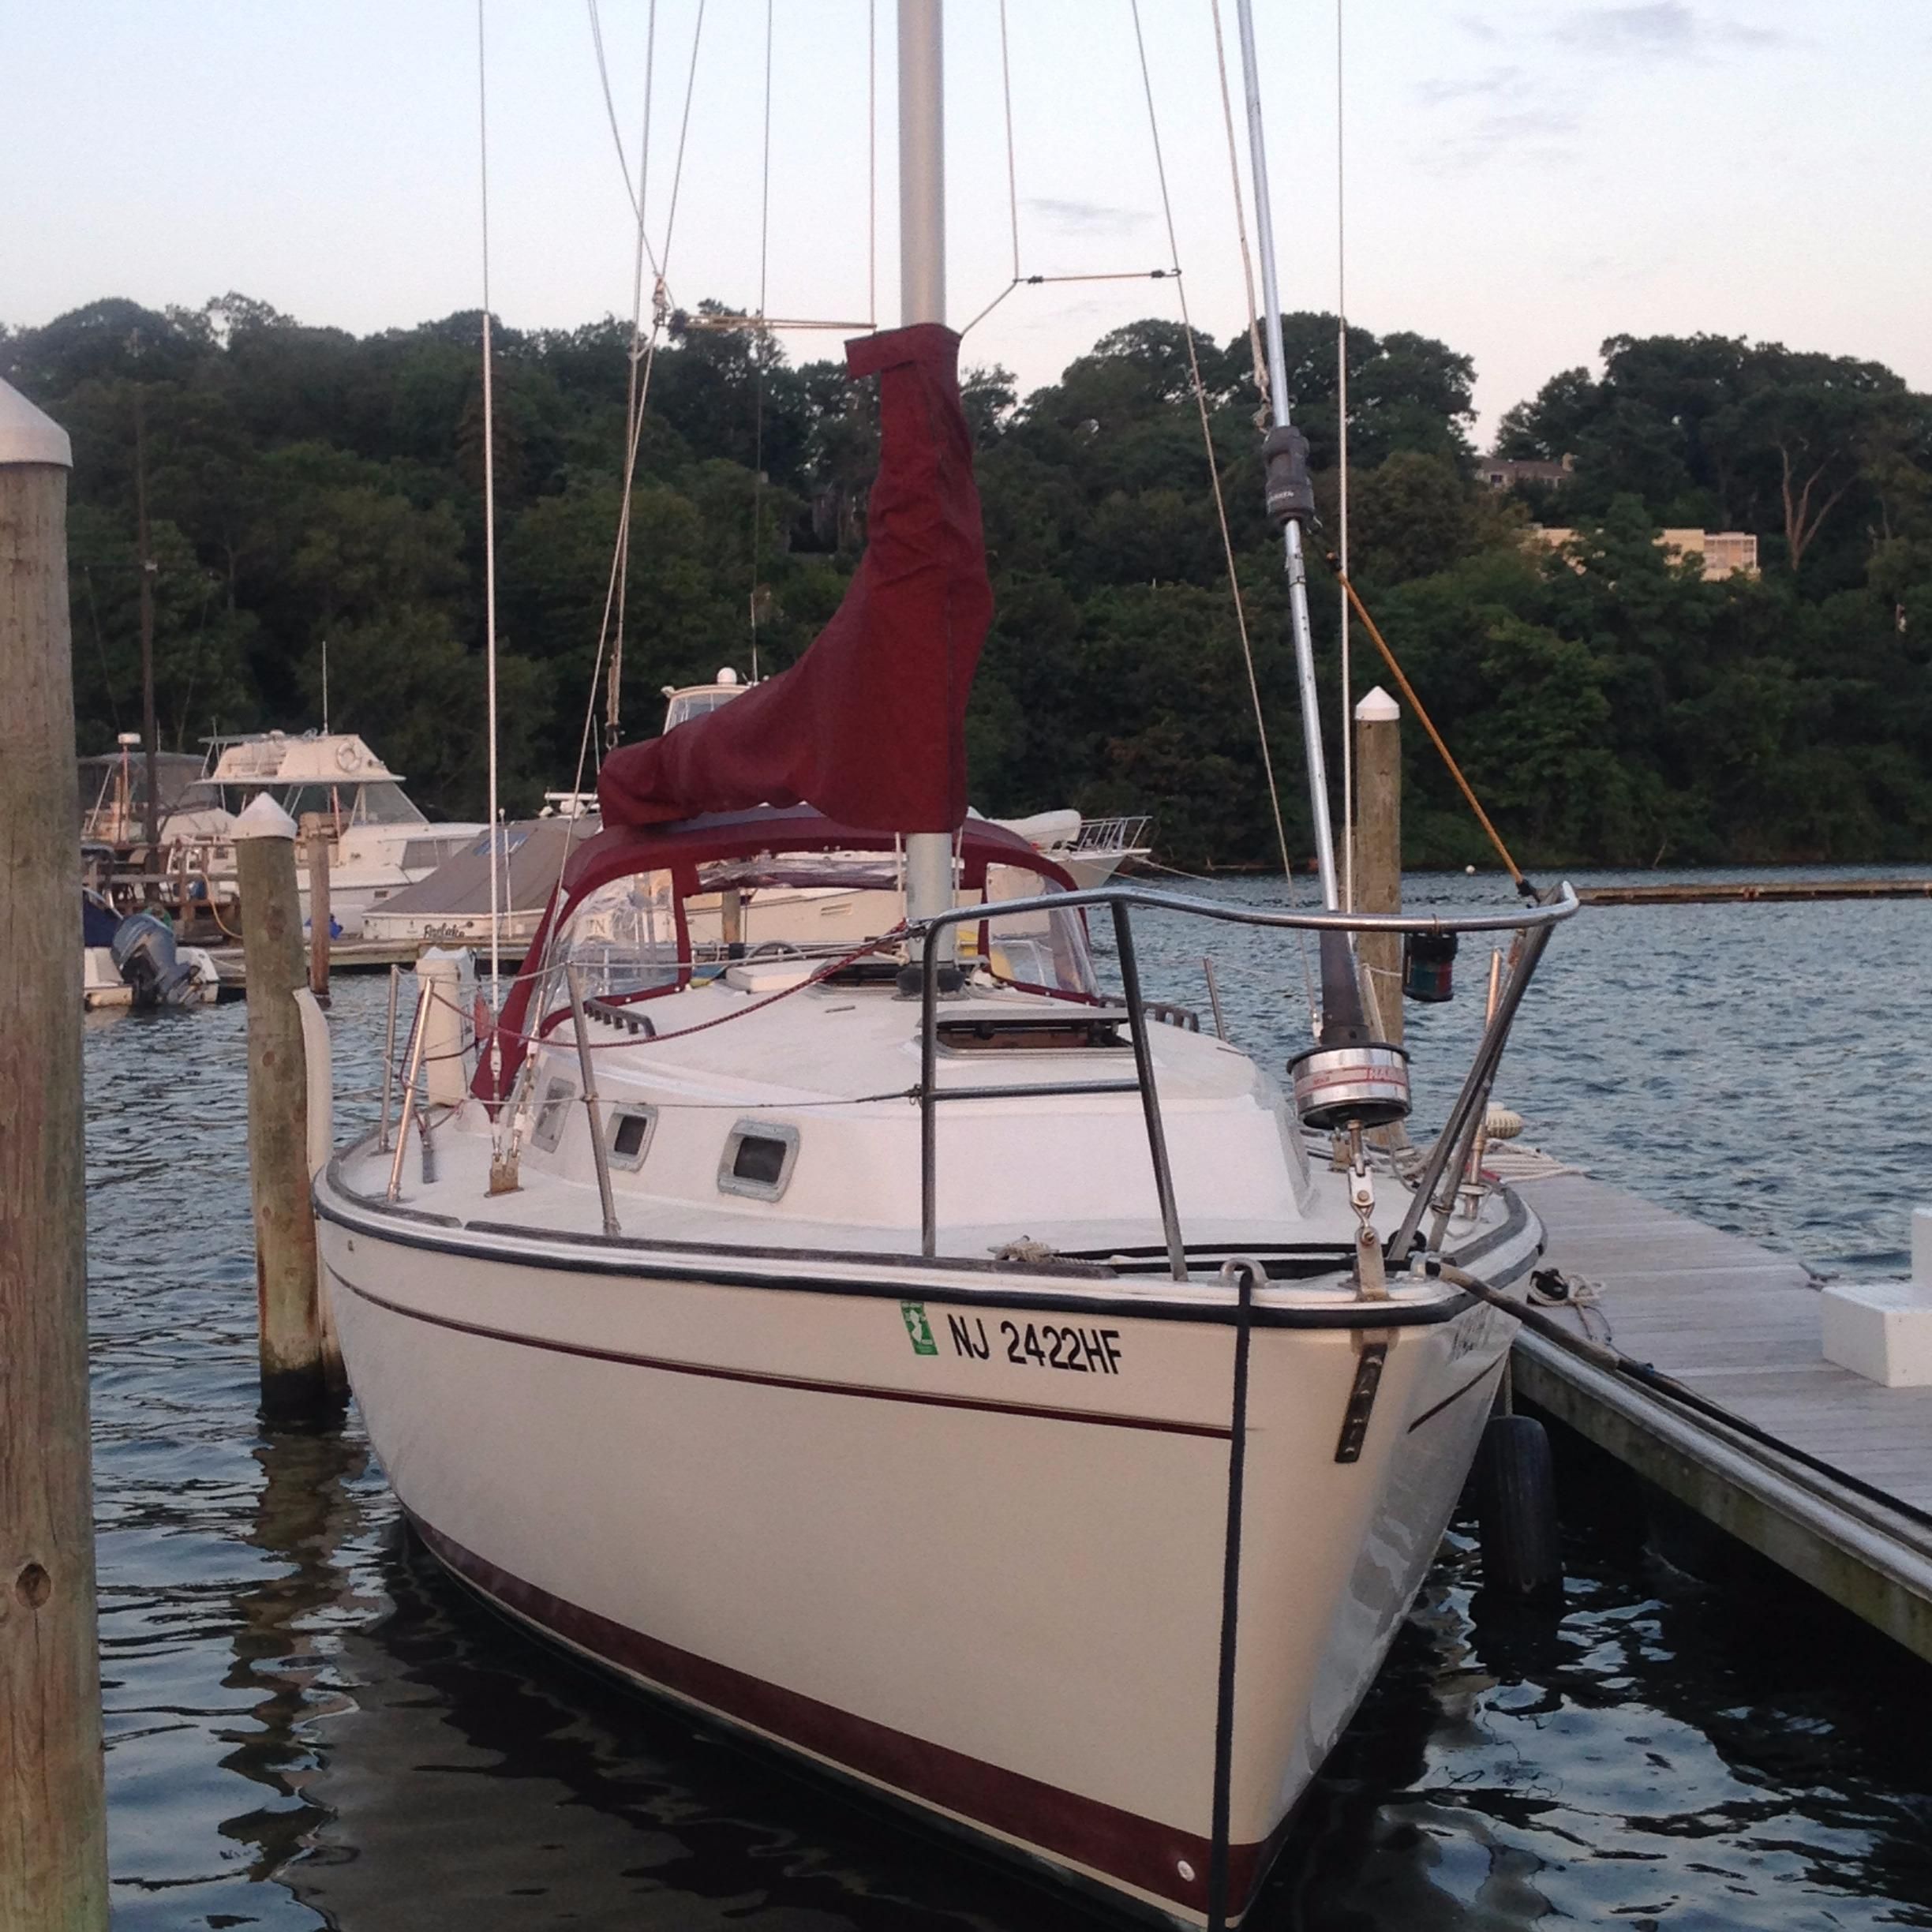 30 foot sailboats for sale near me